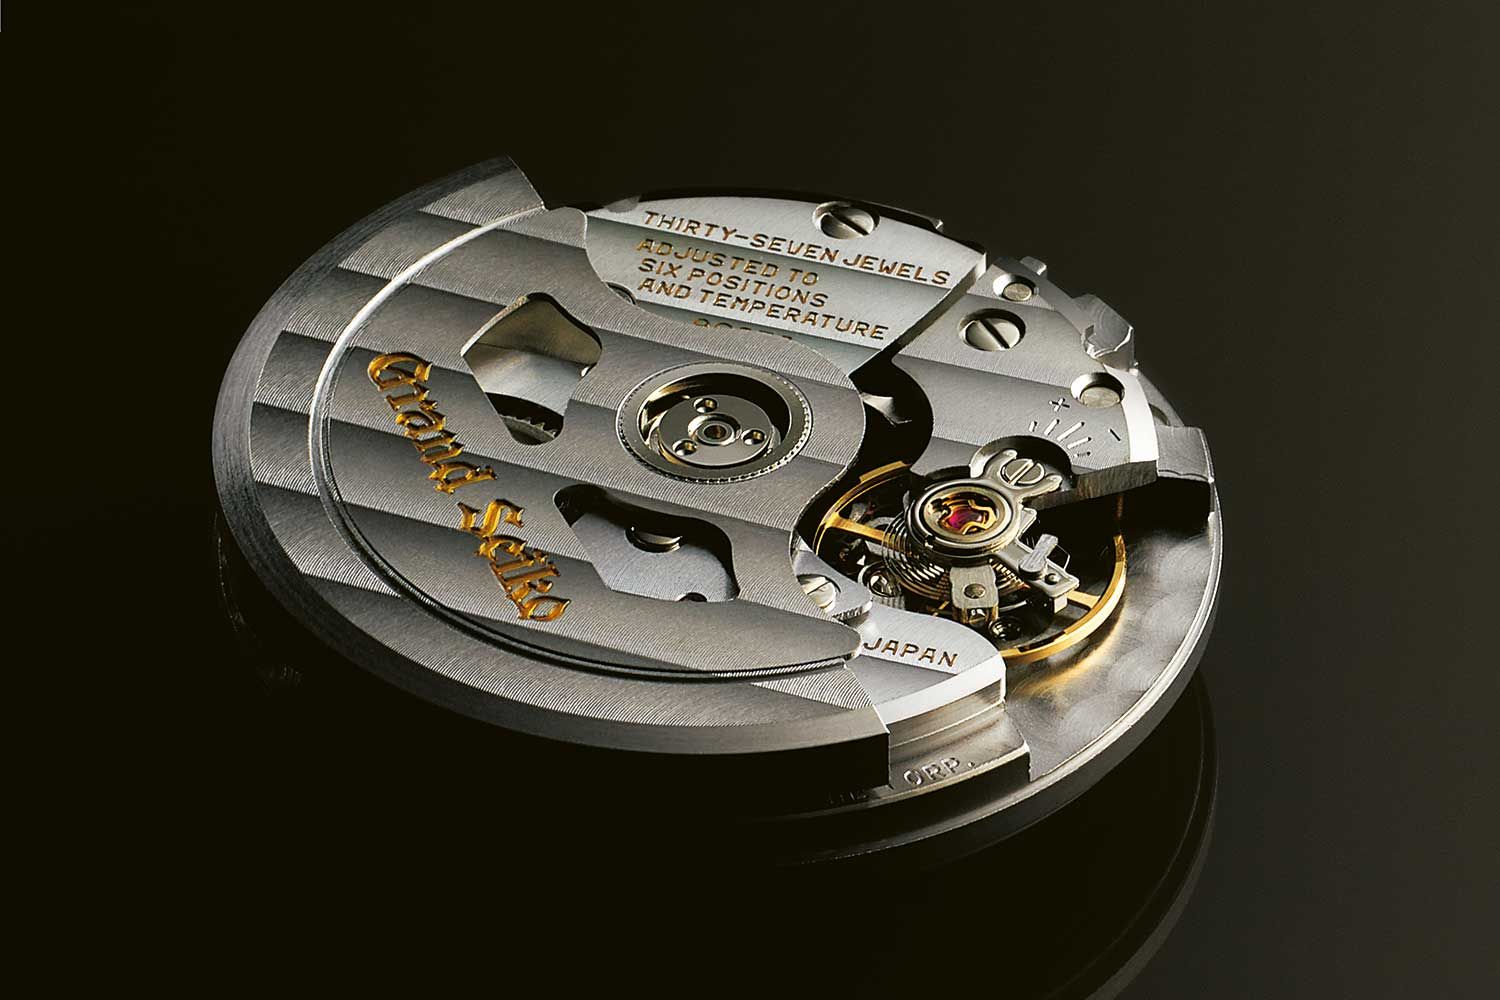 An example of classic Grand Seiko watchmaking, the Hi-Beat Calibre 9S85 is a strong and precise movement, designed for longevity